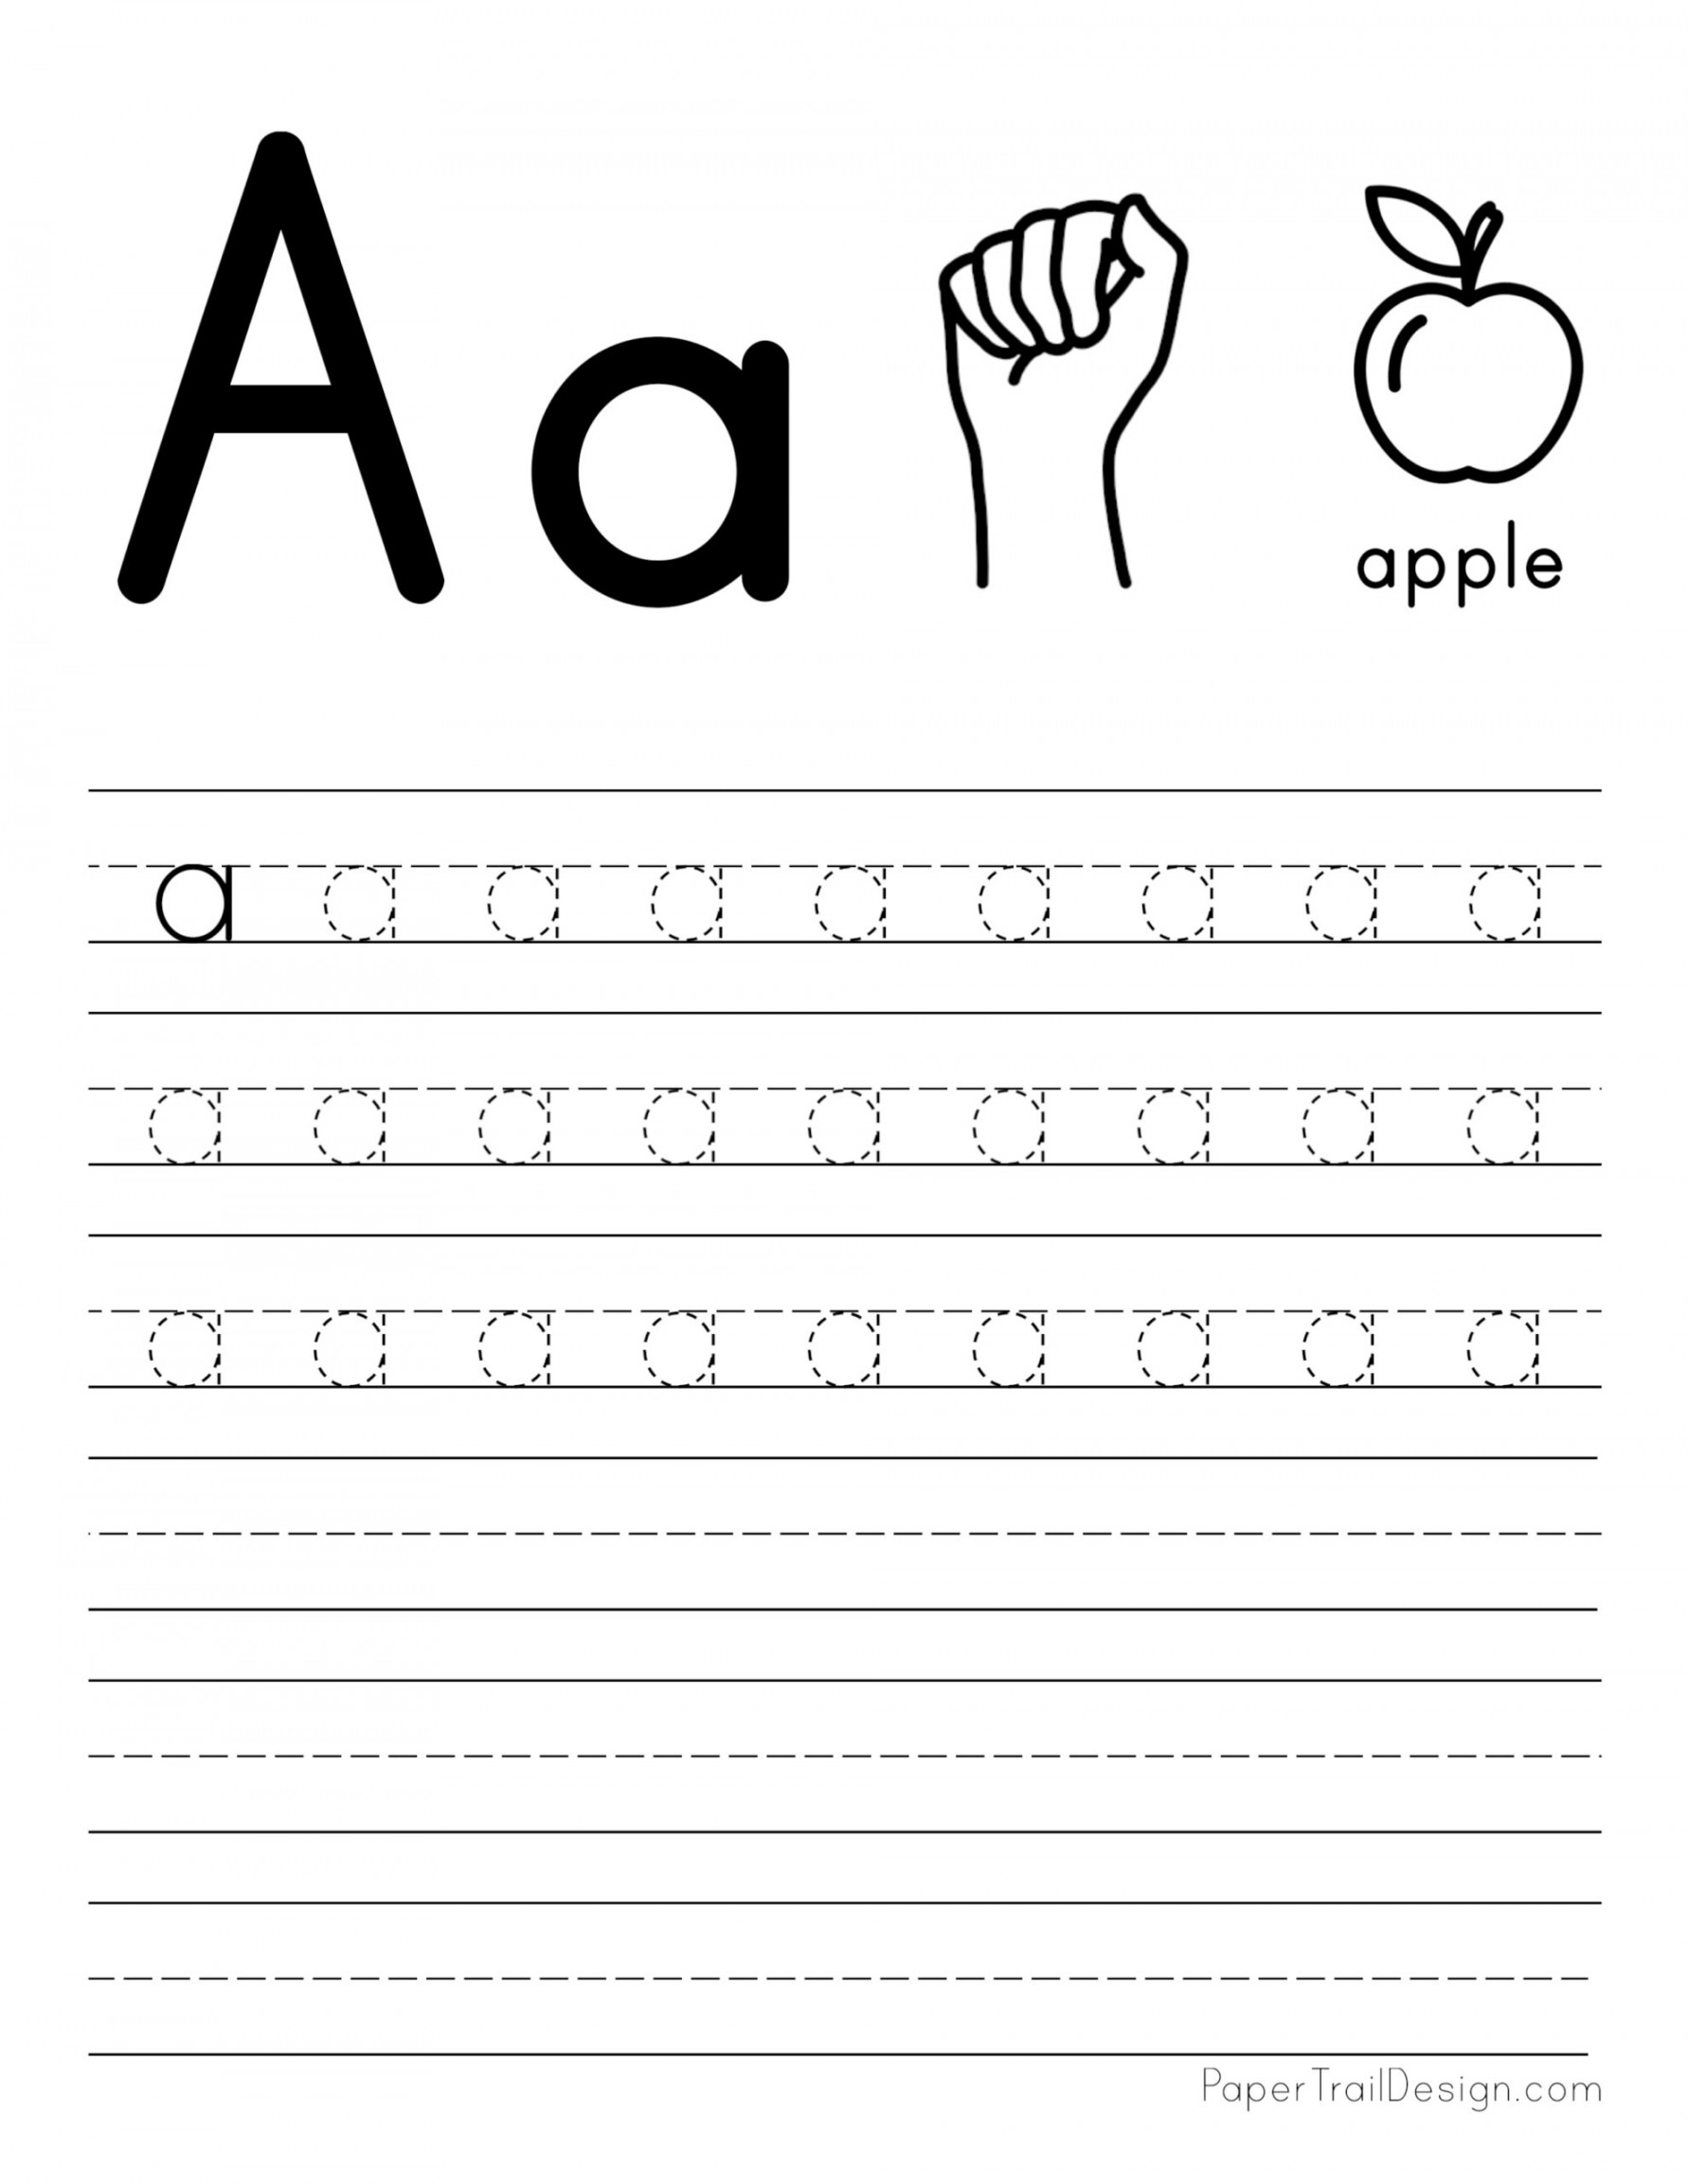 free letter tracing worksheets paper trail design 0